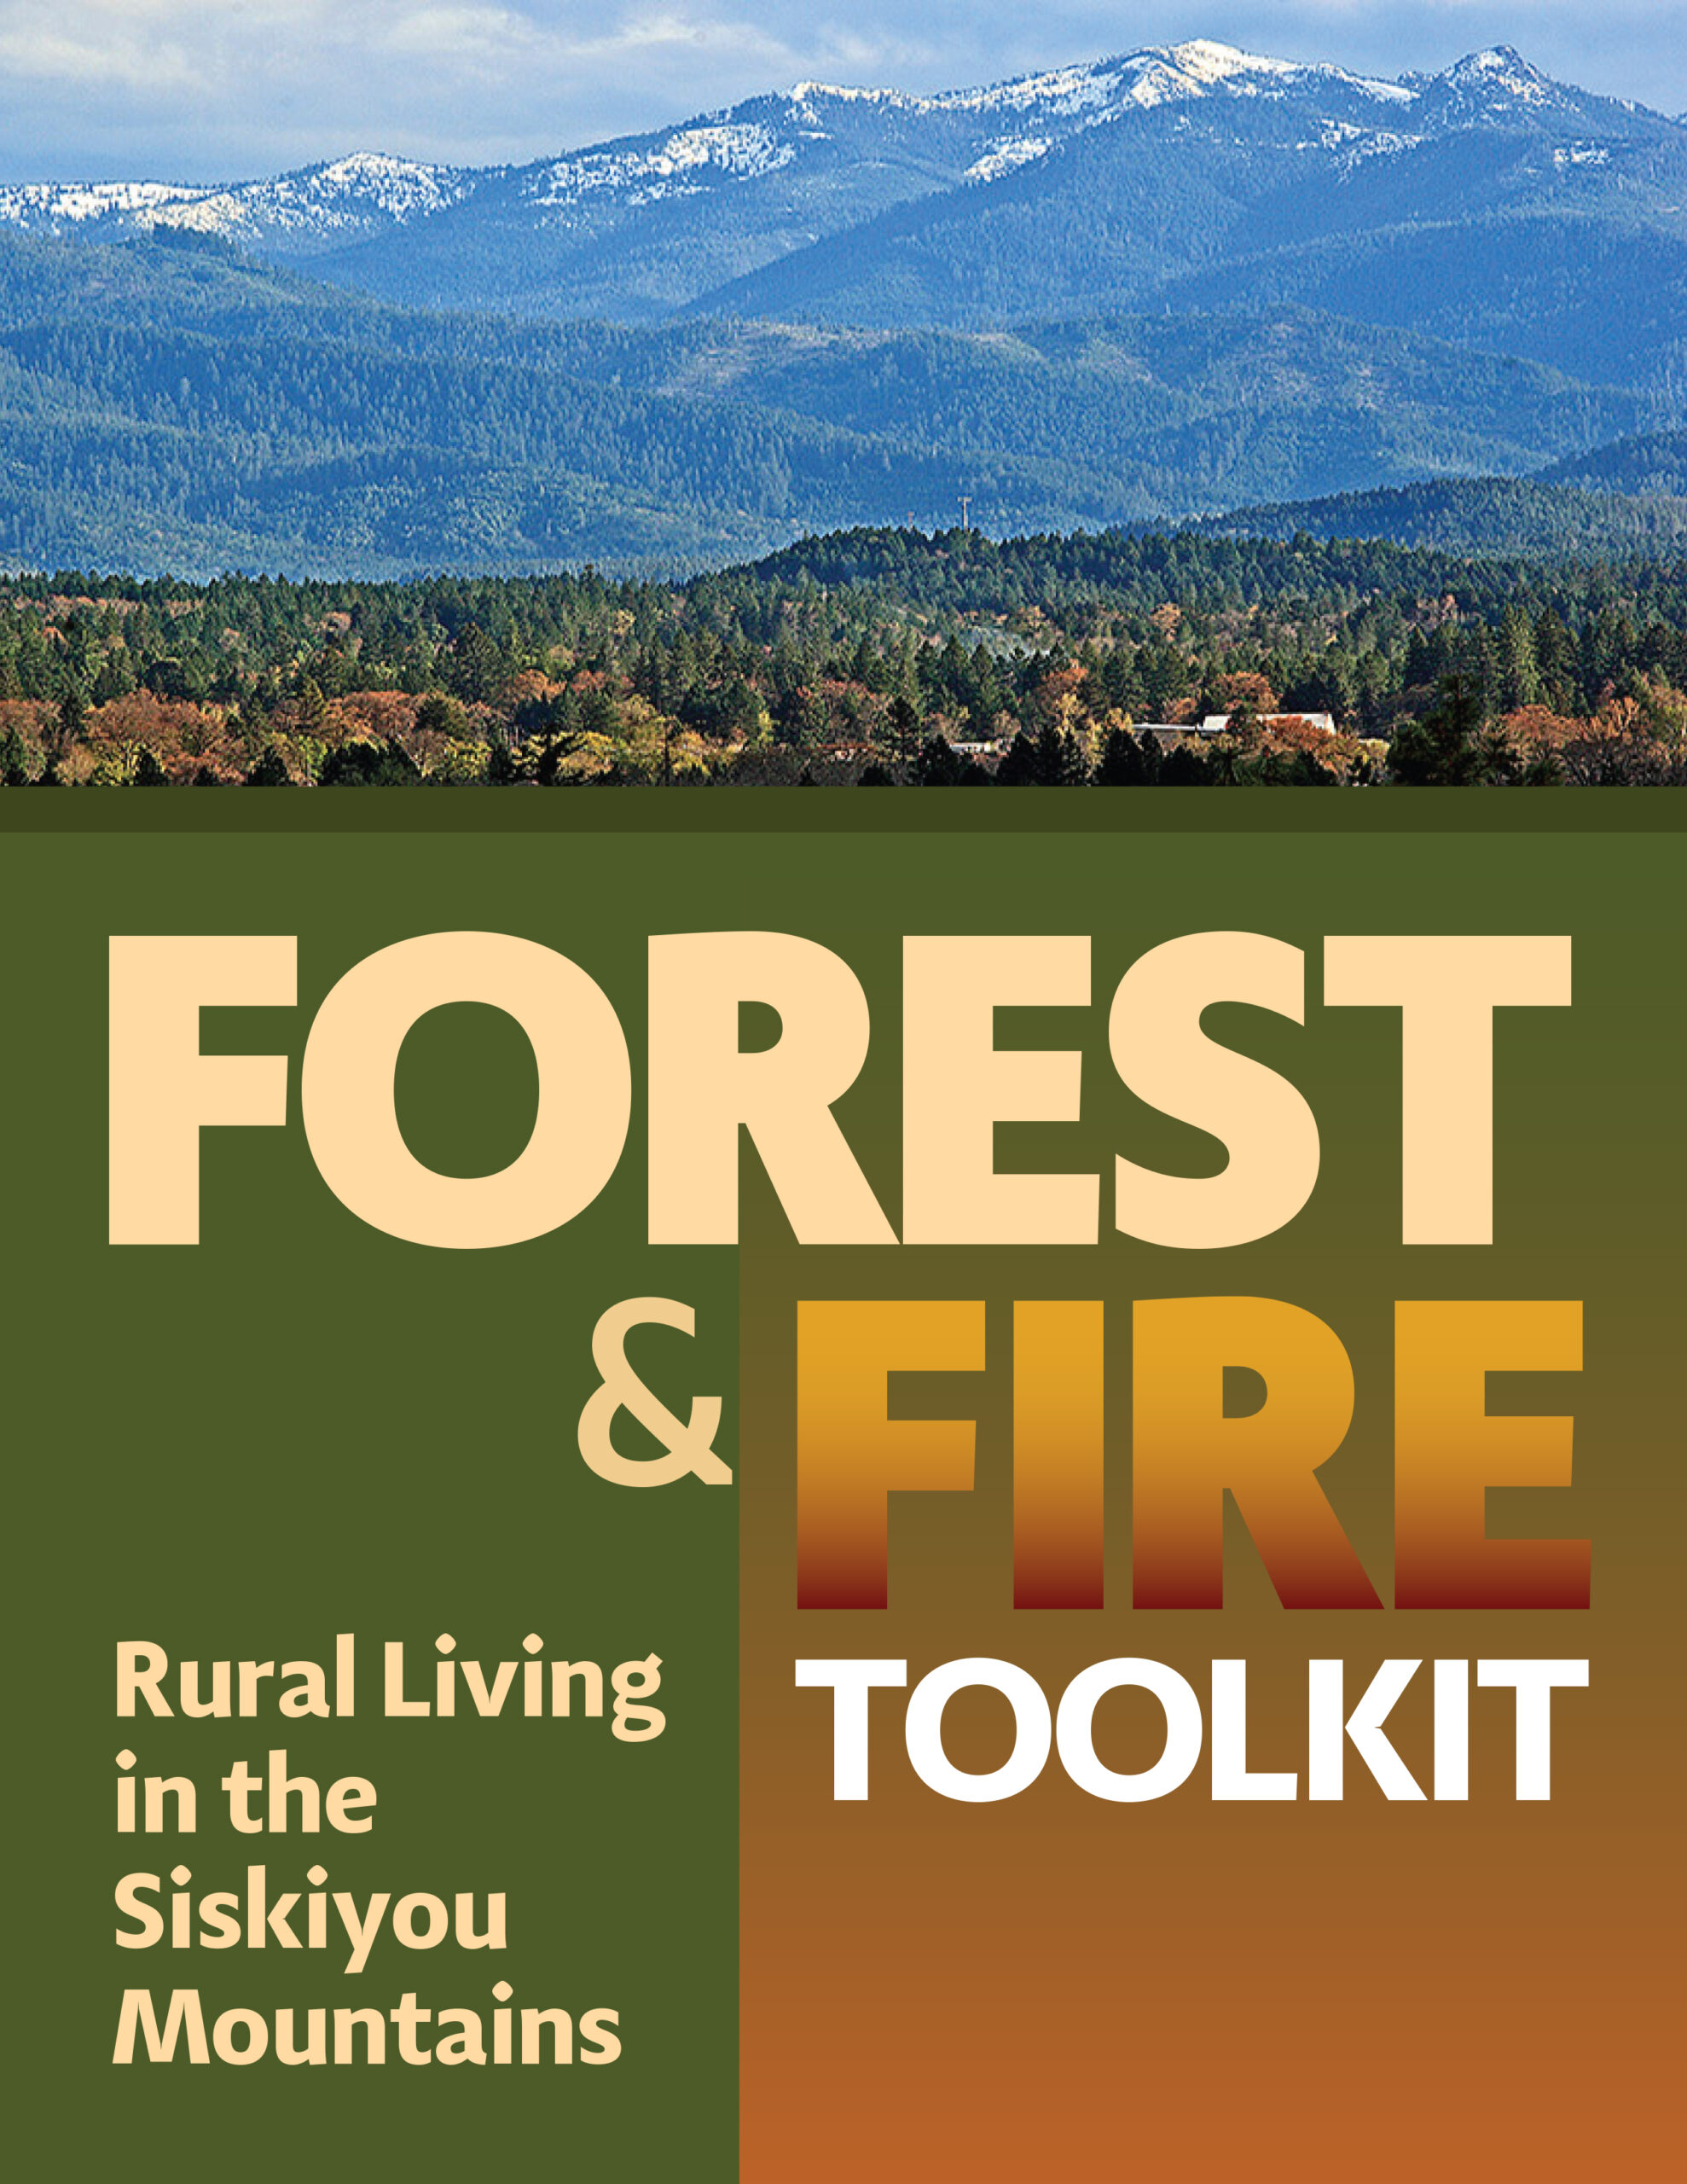 Download the new KS-Wild & Partners Forest & Fire Toolkit